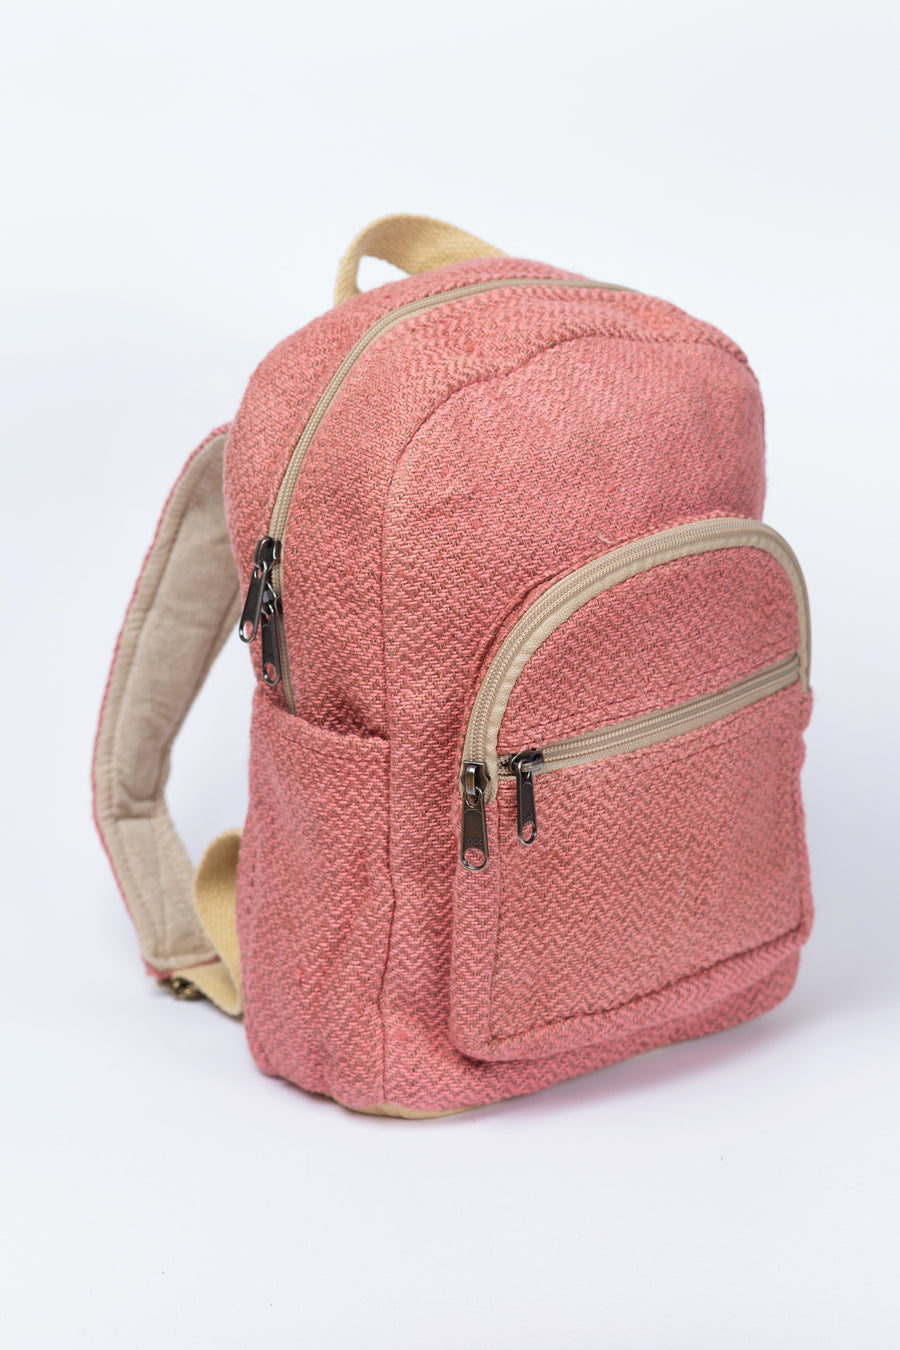 Small pastel pink hemp bagpack - Linen Couture